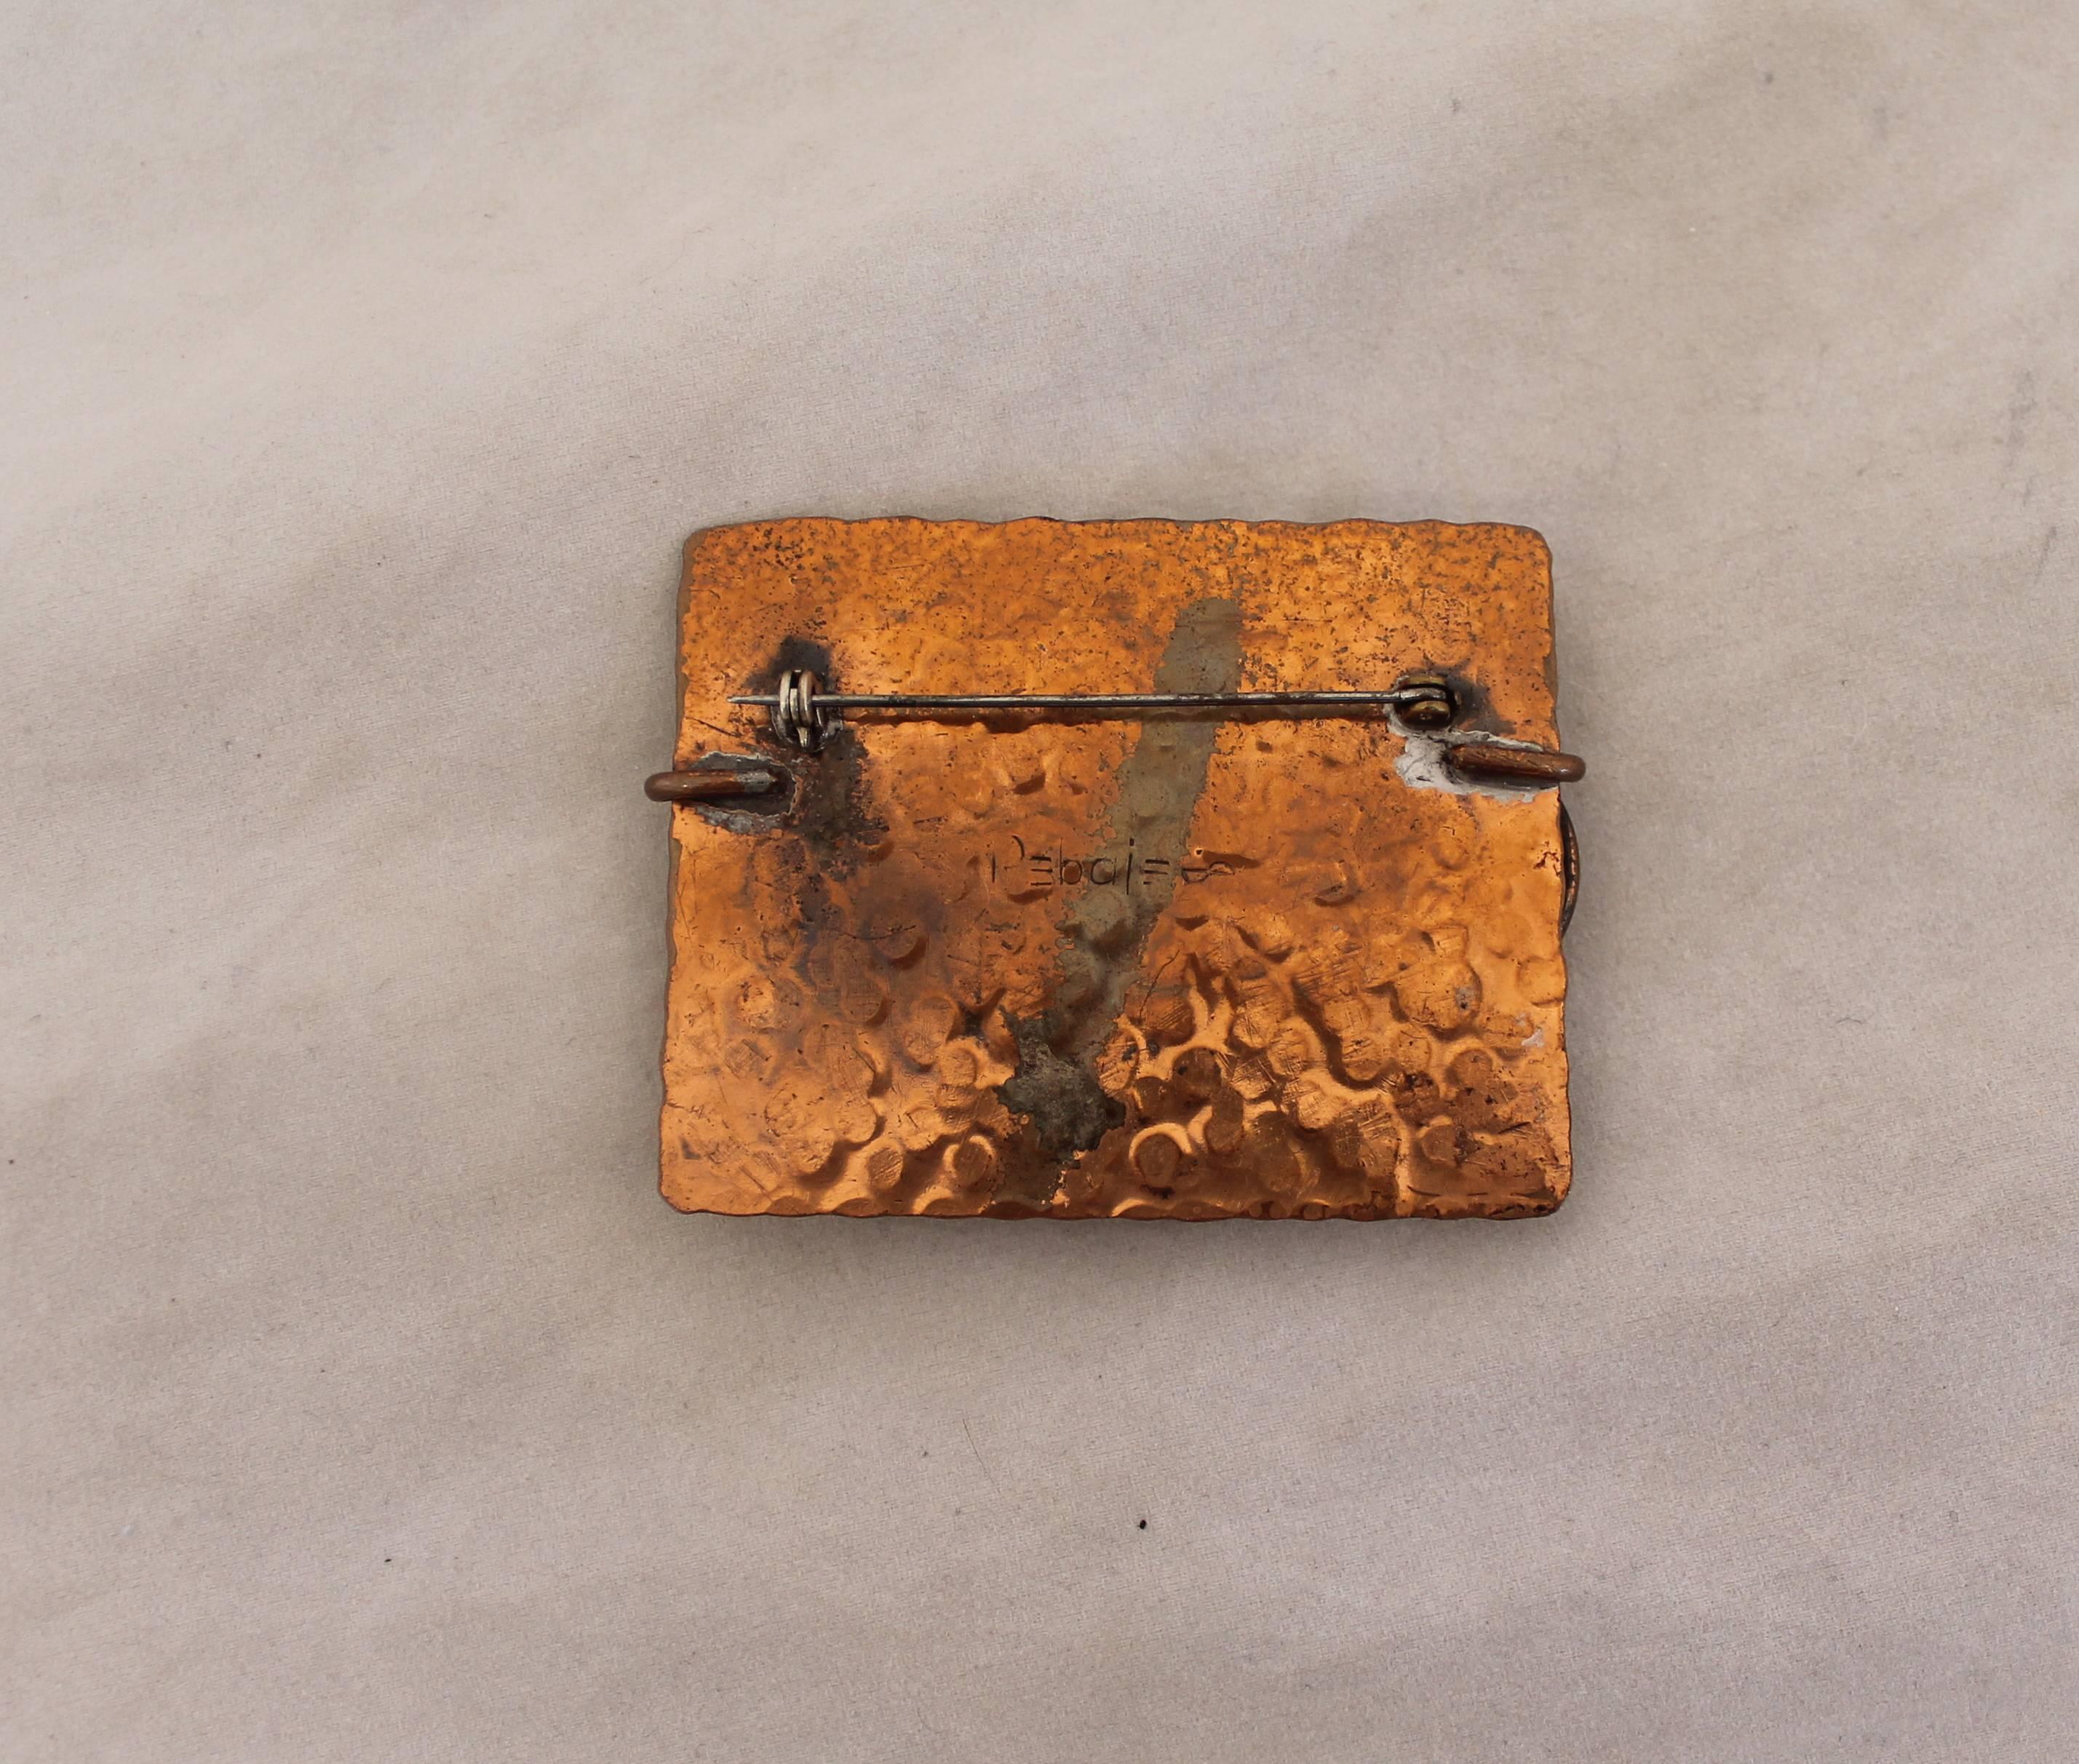 Rebajes Vintage Hammered Copper w/ Coil Pin - 1950's.  This artsy vintage pin is in very good vintage condition with only some wear consistent with its age.  it features a hammered copper, a coil design, and a darkened area behind the coil for added